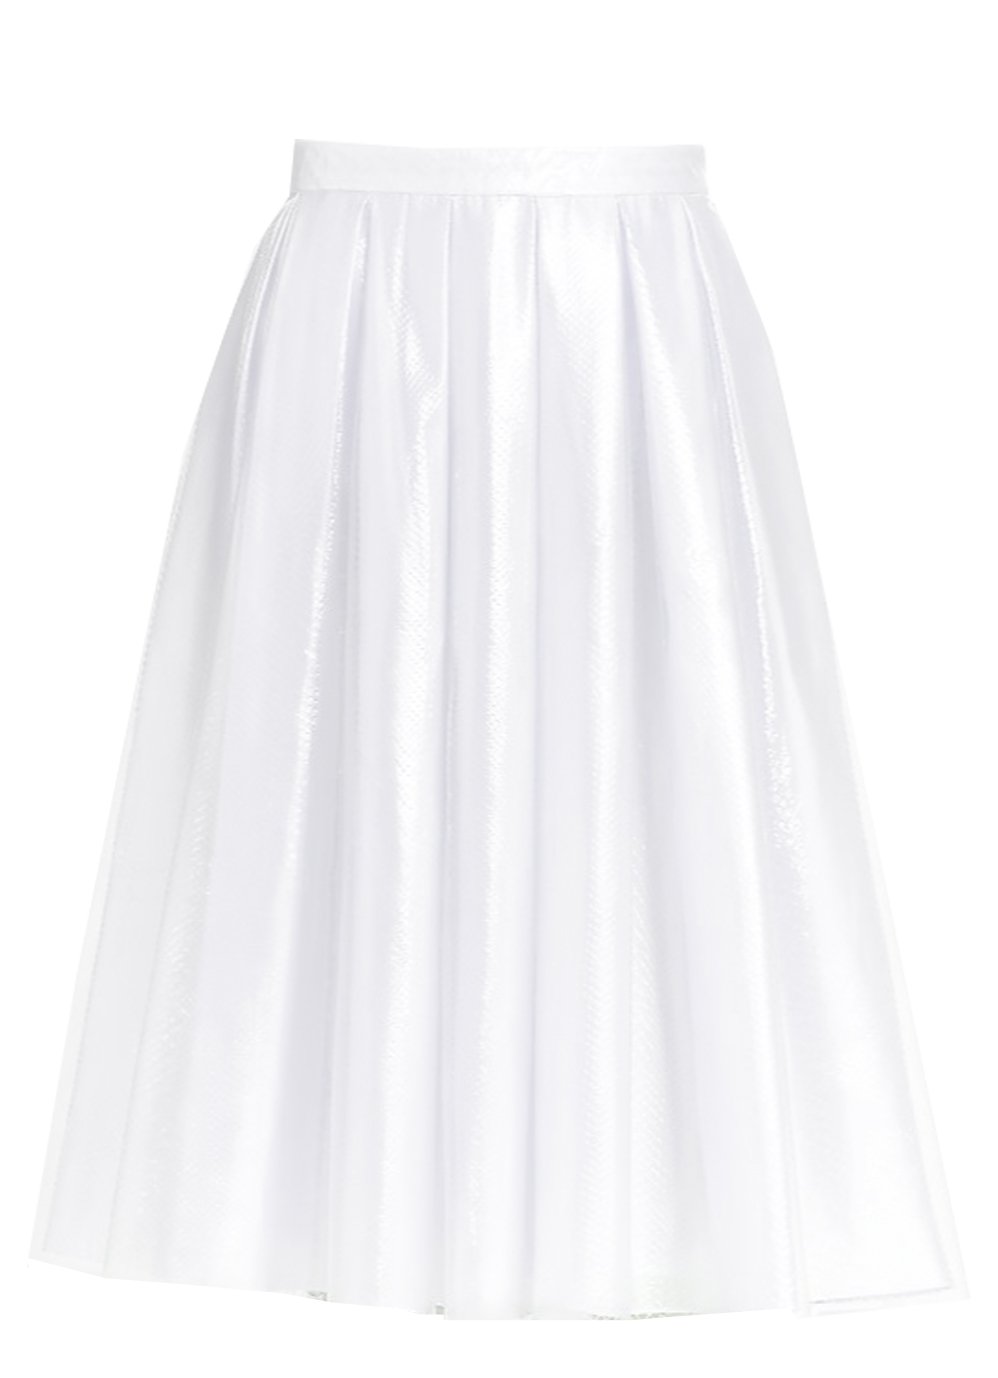 Pleated White Satin Skirt with sheer 